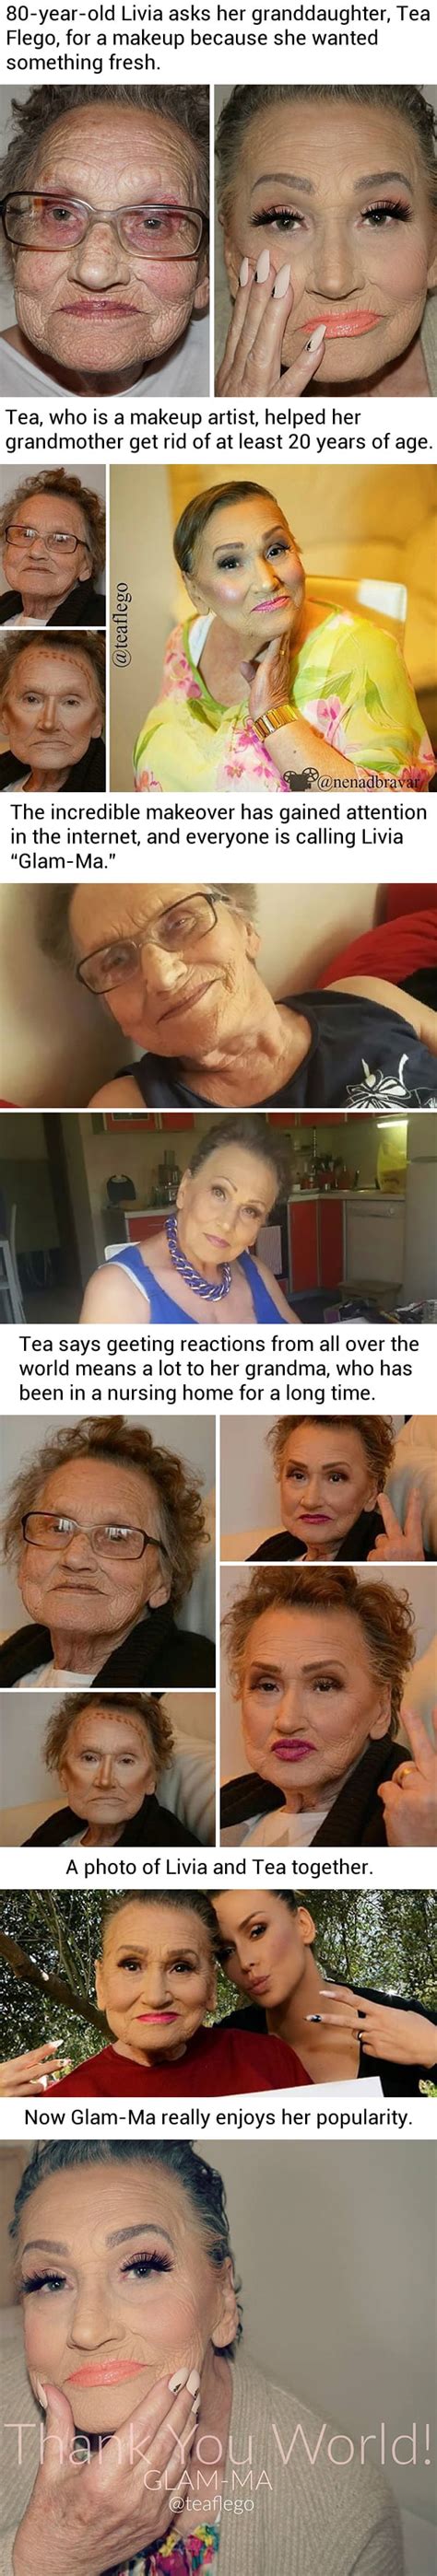 80 year old grandma asks her granddaughter for a makeup and becomes popular among internet 9gag